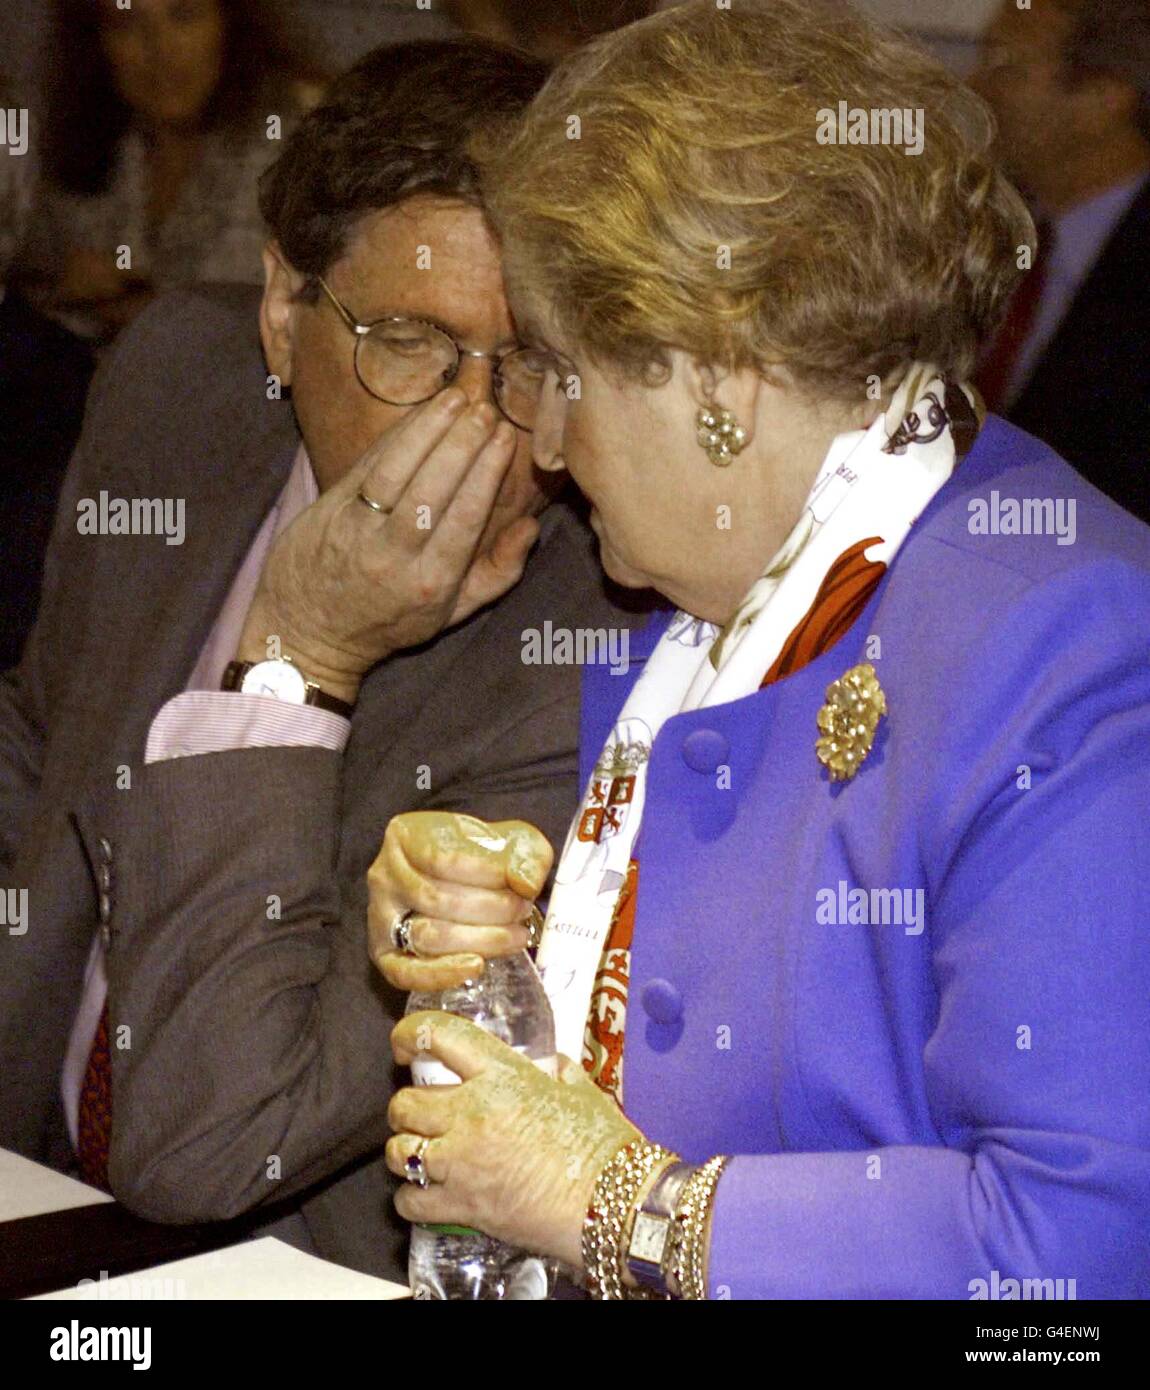 US Secretary of State Madeline Albright, right, listens to a comment from Special Envoy Richard Holbrook, at the beginning of the Contact Group meeting on Kosovo, at London's Heathrow Airport Thursday Oct. 8, 1998. The group of six foreign ministers from the US, Britain, Russia, Germany, France and Italy met to discuss the crisis in Kosovo, and the possibility of NATO air strikes against Serb forces. (AP Photo/Louisa Buller/POOL) (EDI) Stock Photo